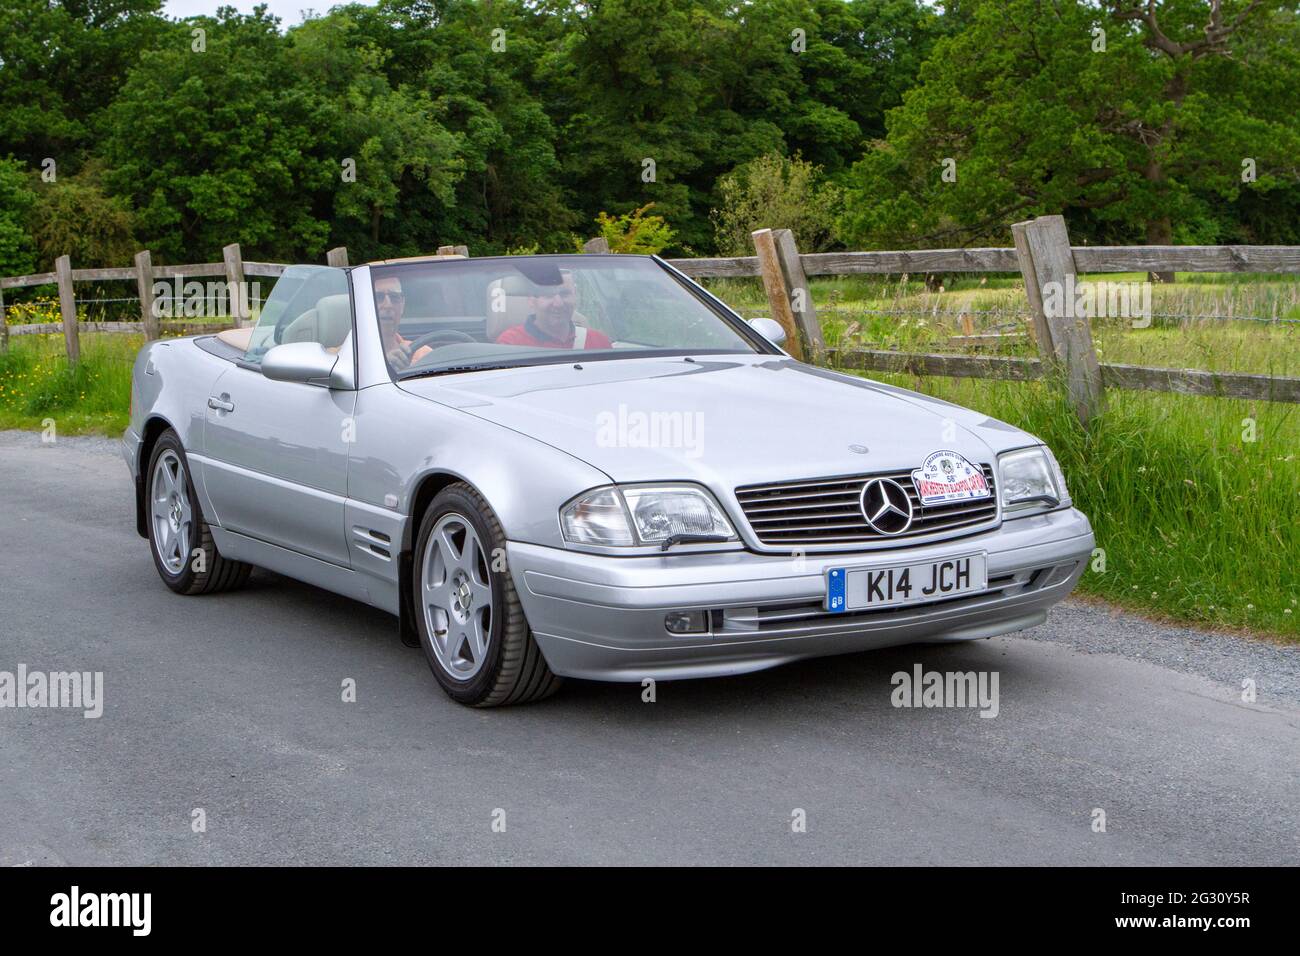 2000 Mercedes Benz S1320 Auto silver 3198cc roadster at 58th Annual Manchester Blackpool Vintage & Classic Car Run The event is a ‘Touring Assembly’ Stock Photo